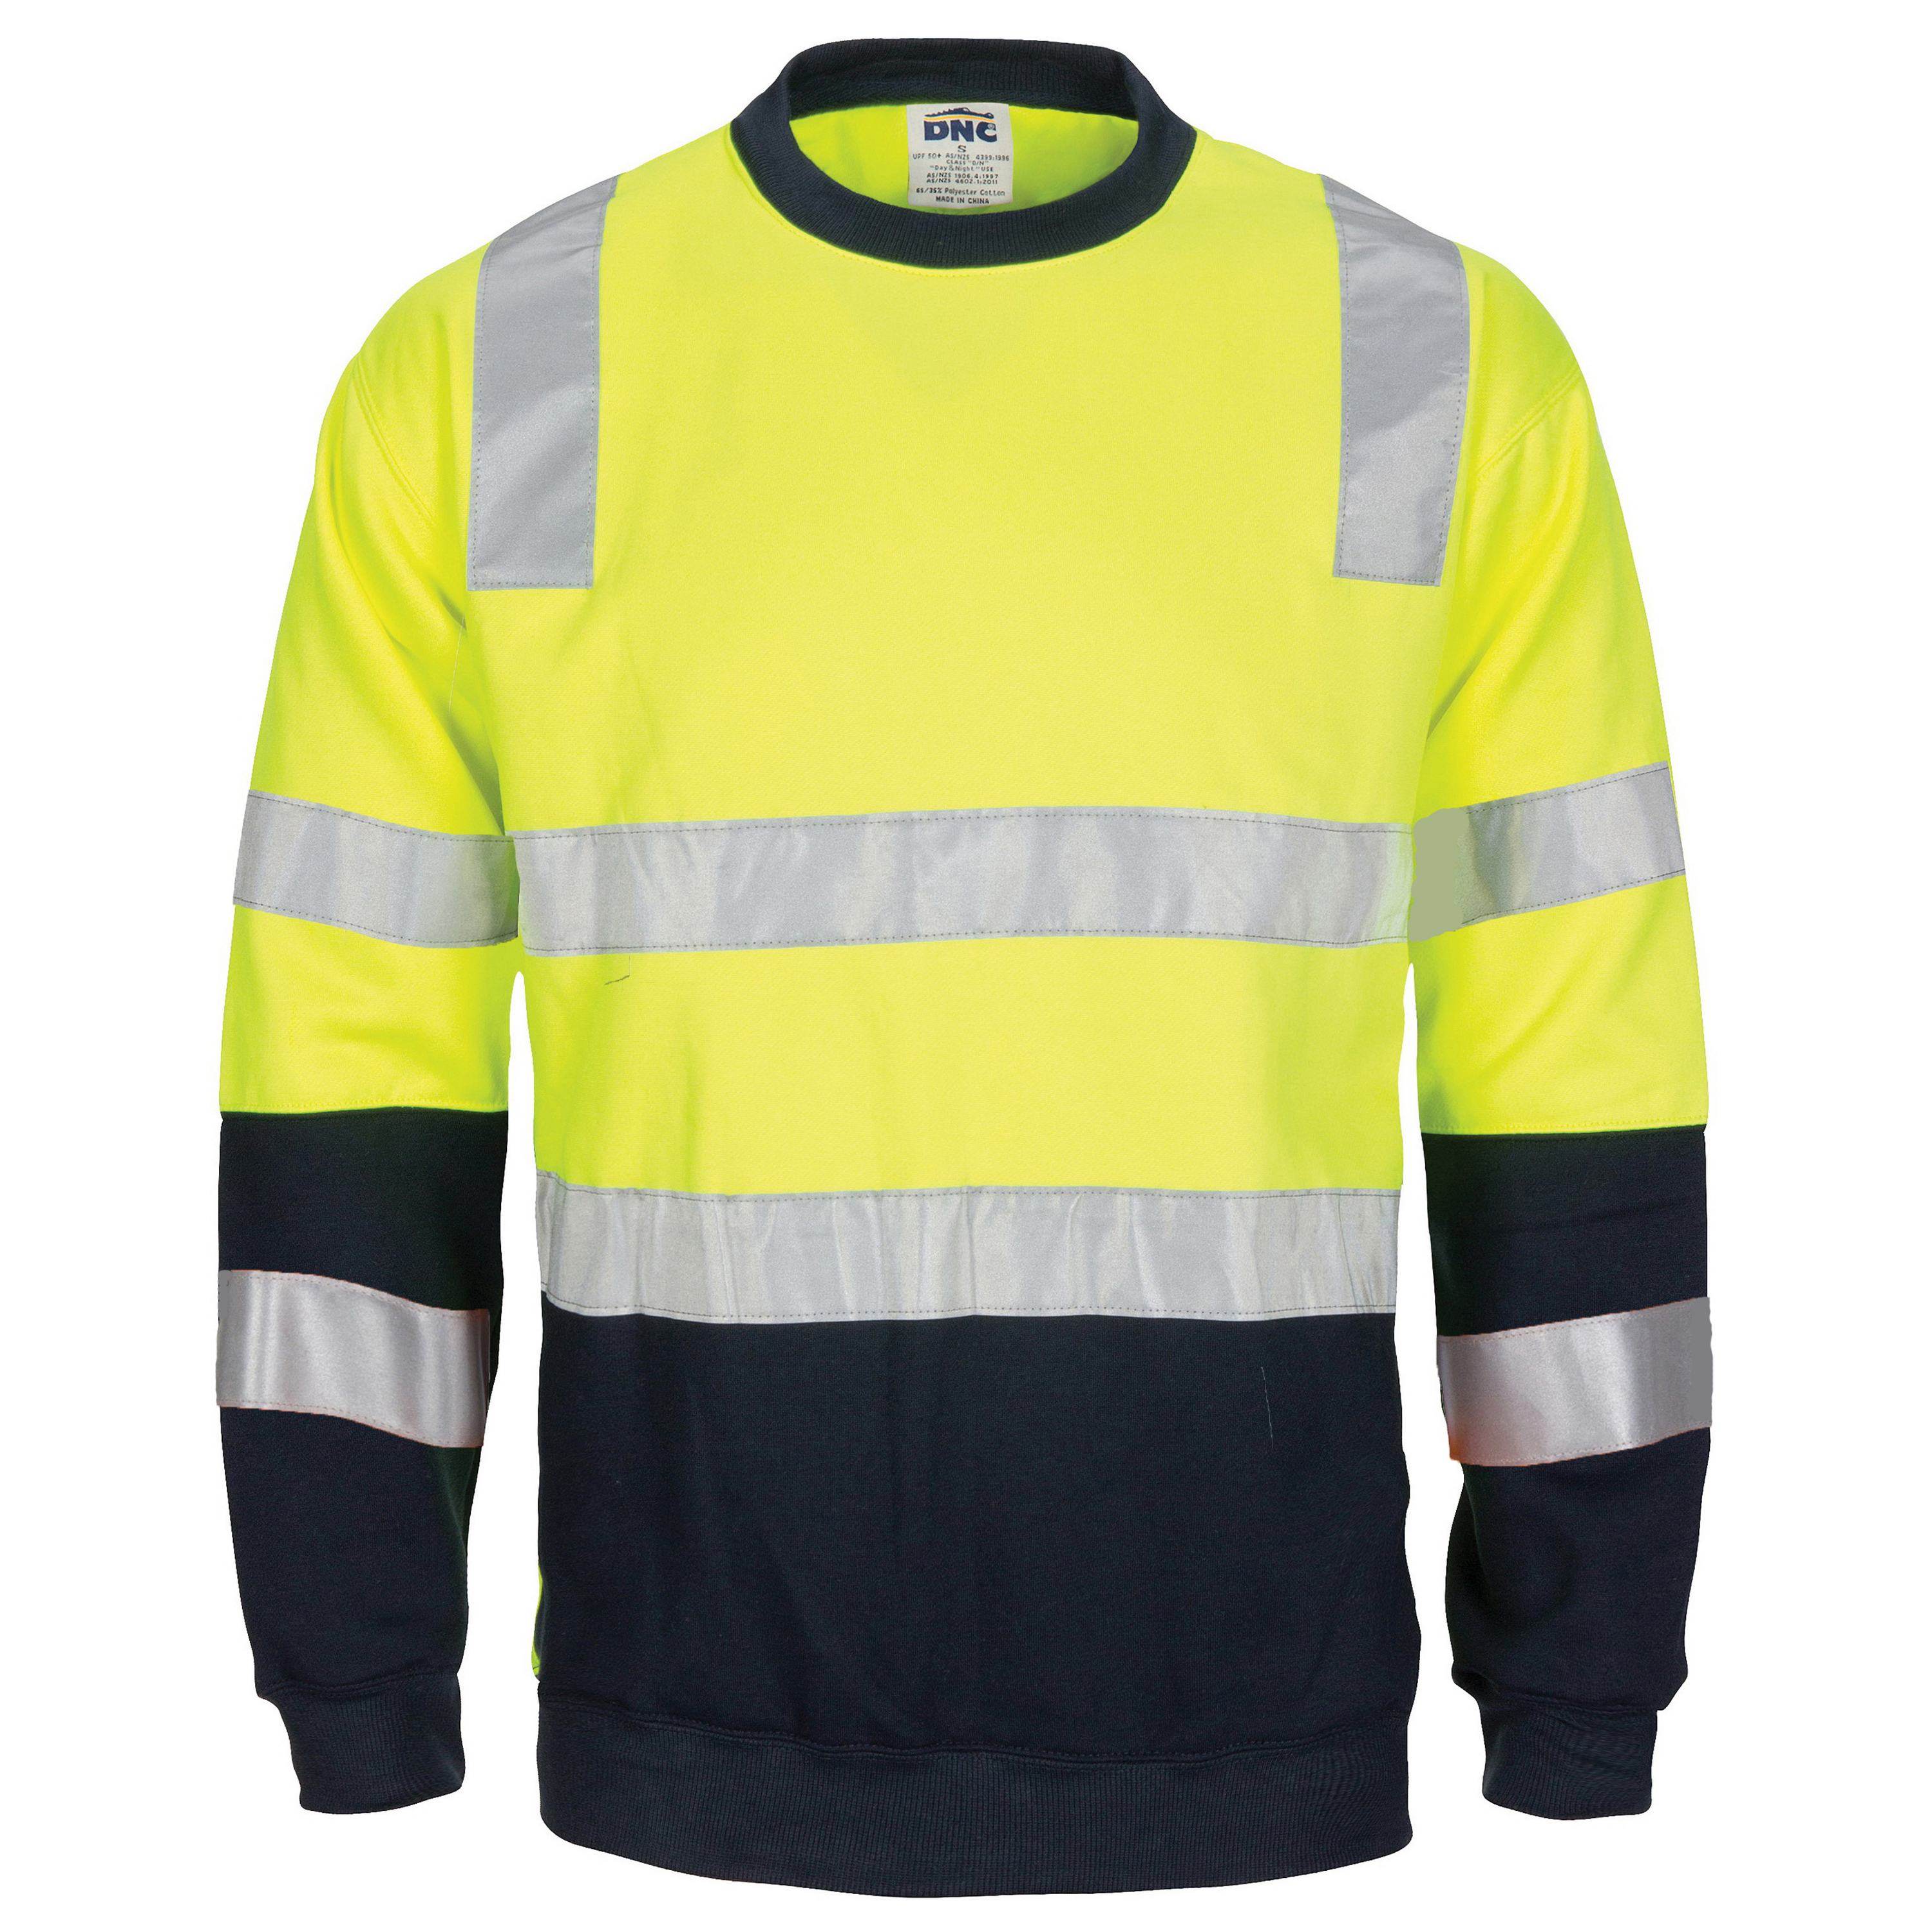 DNC HIVIS 2 tone crew-neck fleecy sweat shirt with shoulders double hoop body and arms CSR R-Tape-DNC